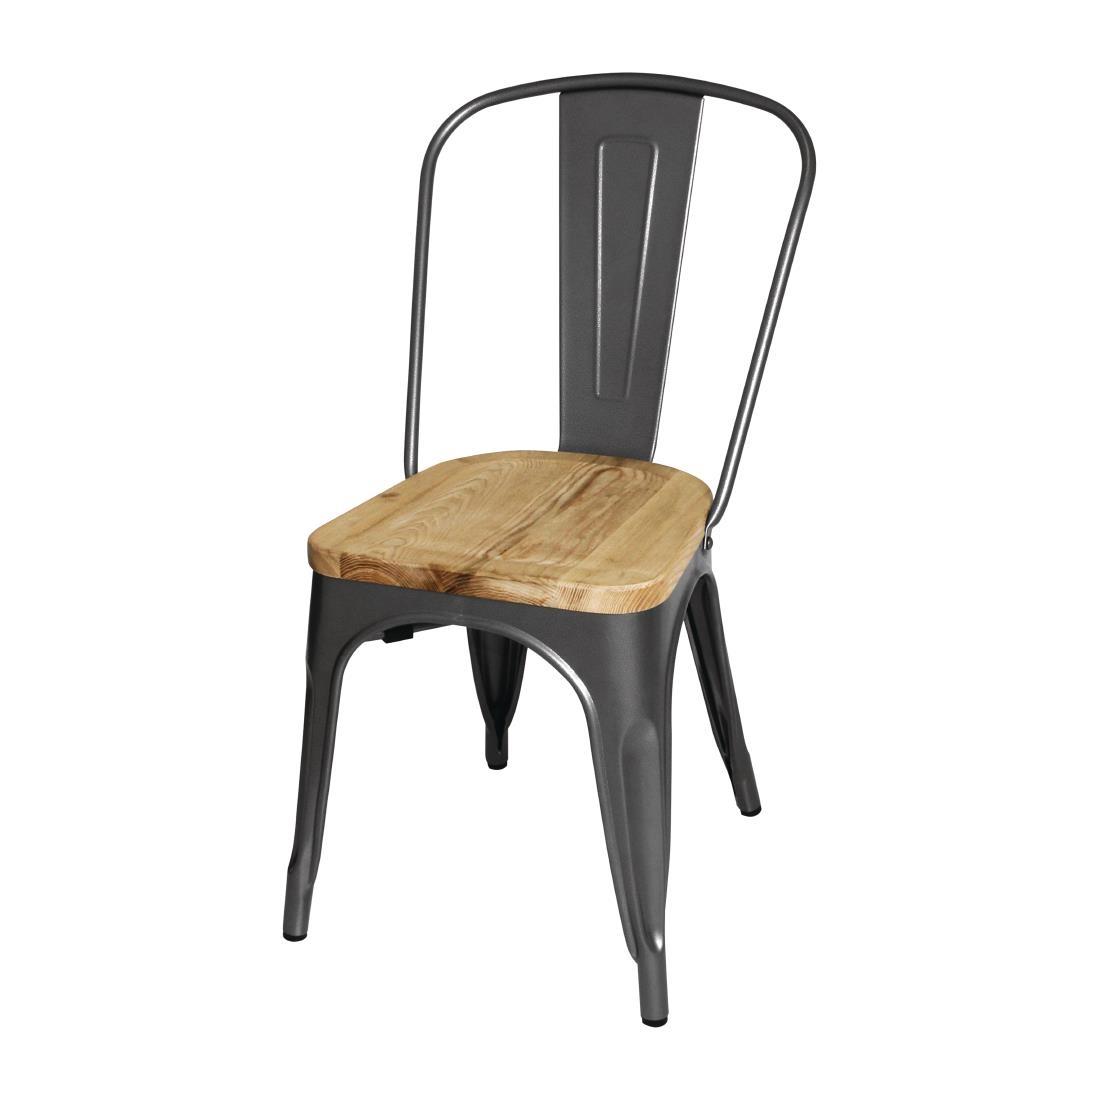 Bolero Bistro Side Chairs with Wooden Seat Pad Gun Metal (Pack of 4) - GG708  - 2